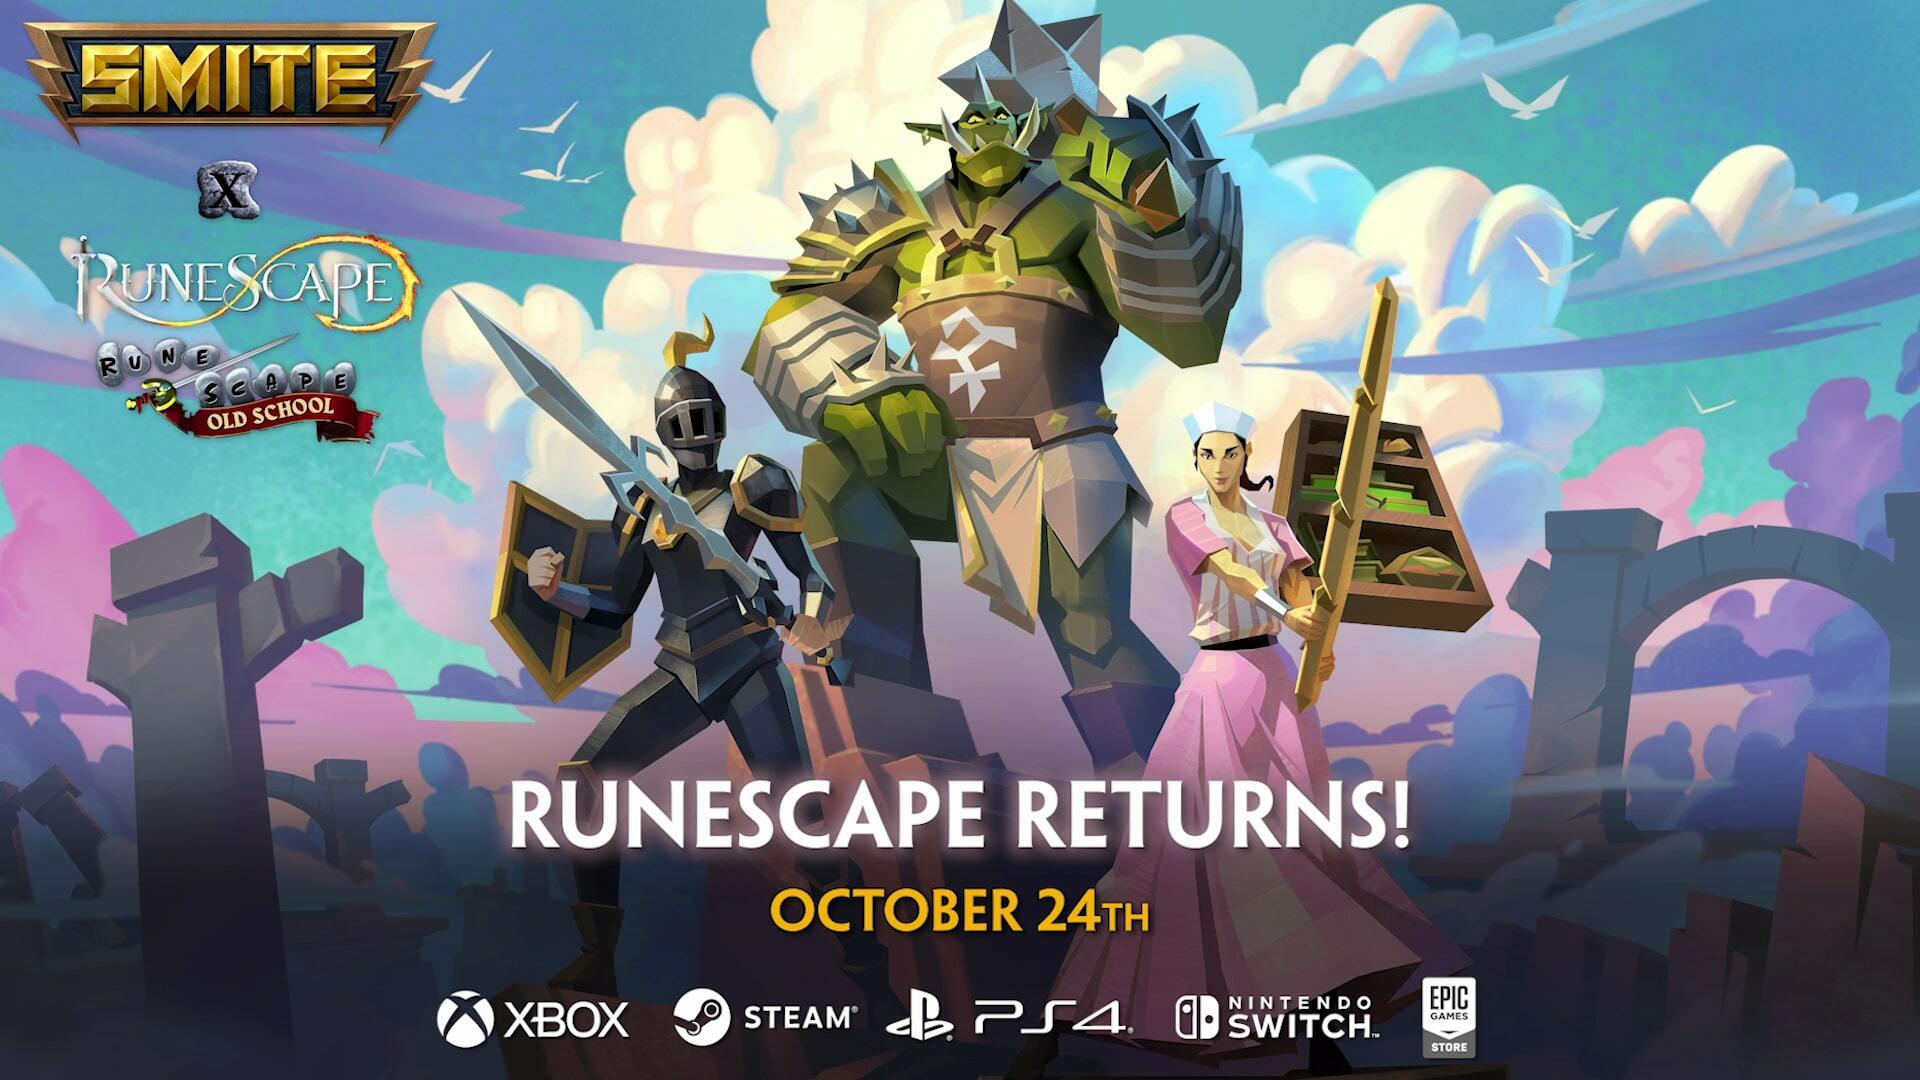 RUNESCAPE AND OLD SCHOOL ARE HEADING TO STEAM